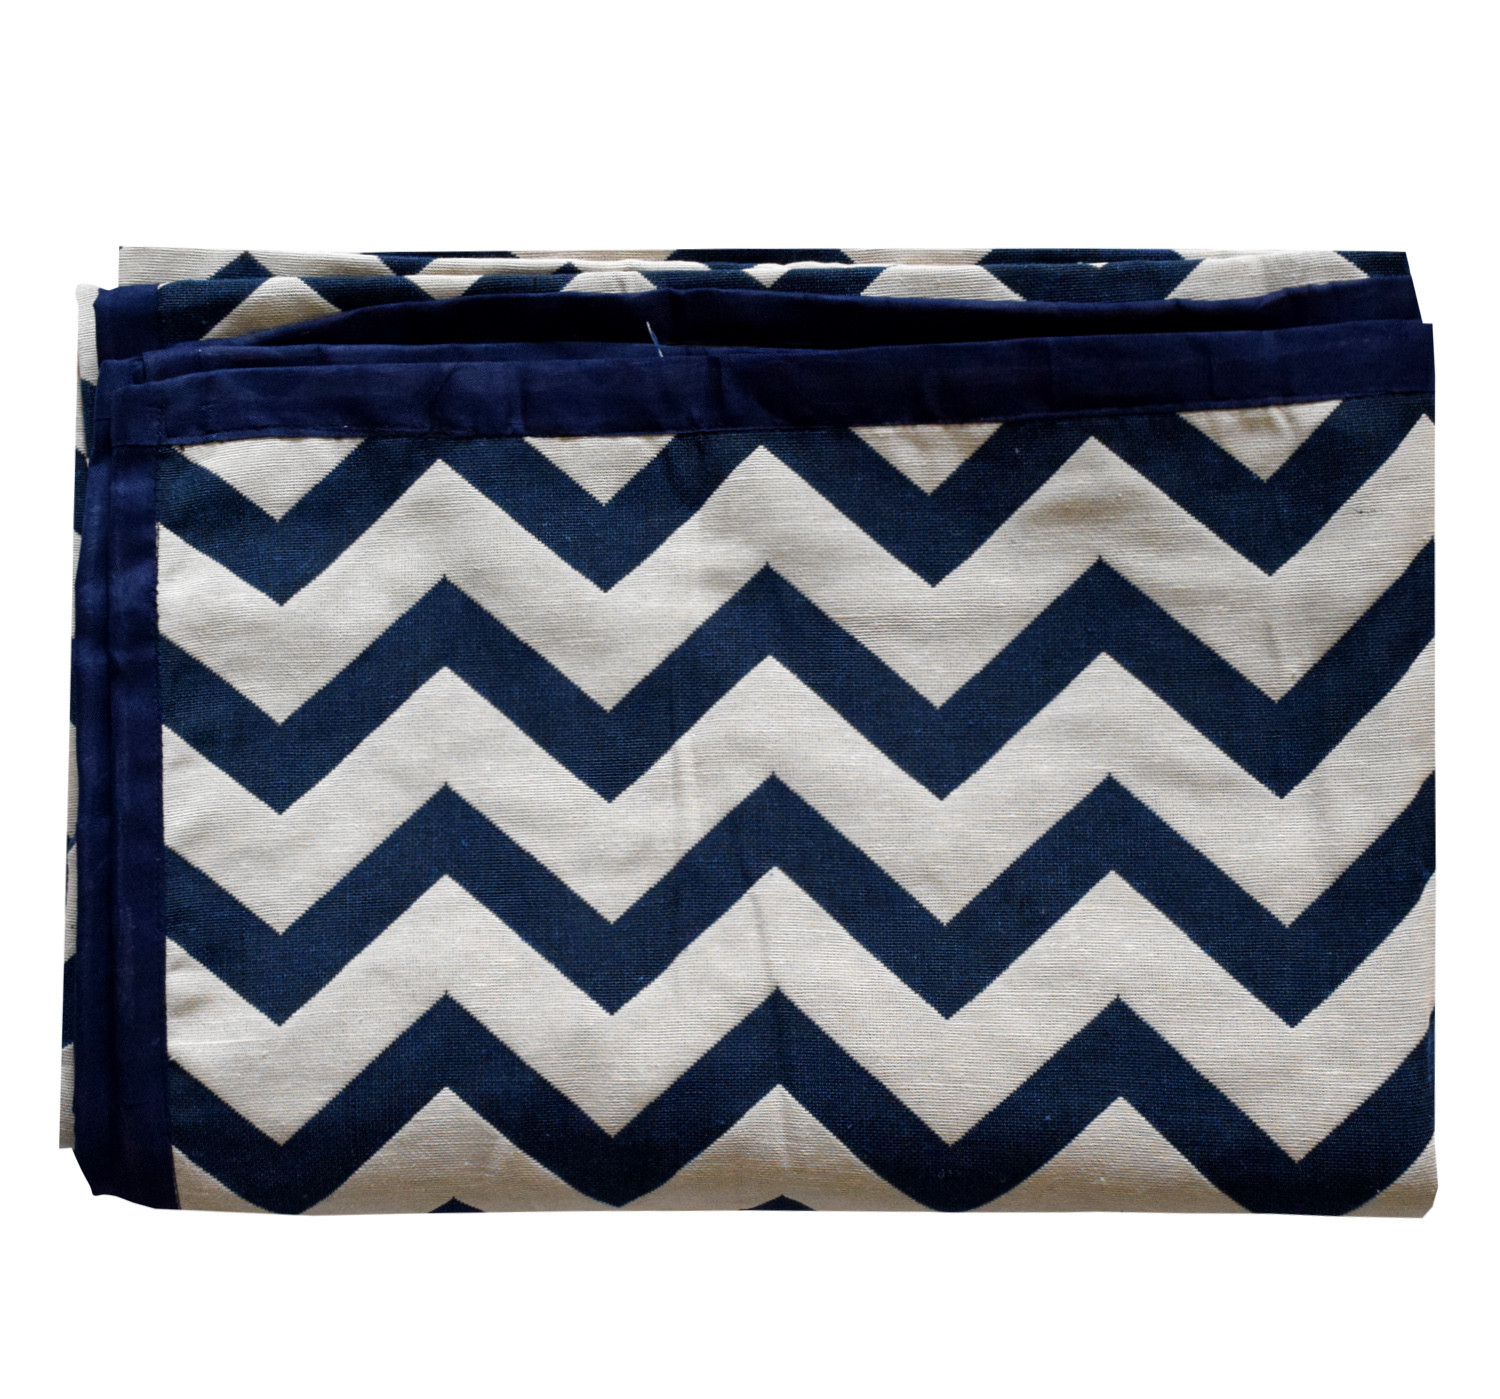 Kuber Industries Cotton Zig Zag Print 4 Seater Center Table Cover/Table Cloth For Home Decorative 60 In. x 40 In. (Blue) 54KM4378